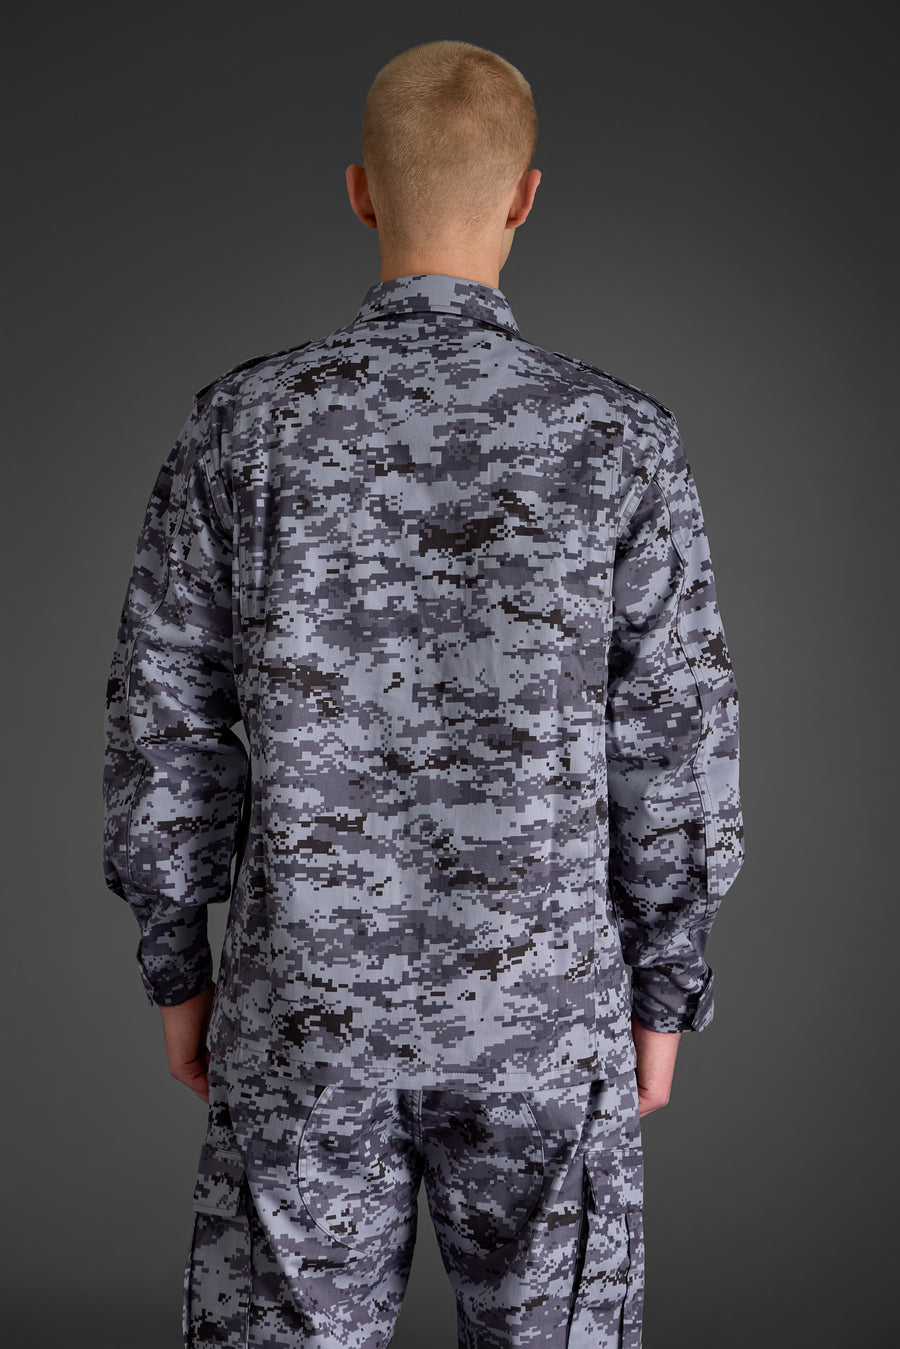 Grey Camouflage BDU Designed for Police Special Forces